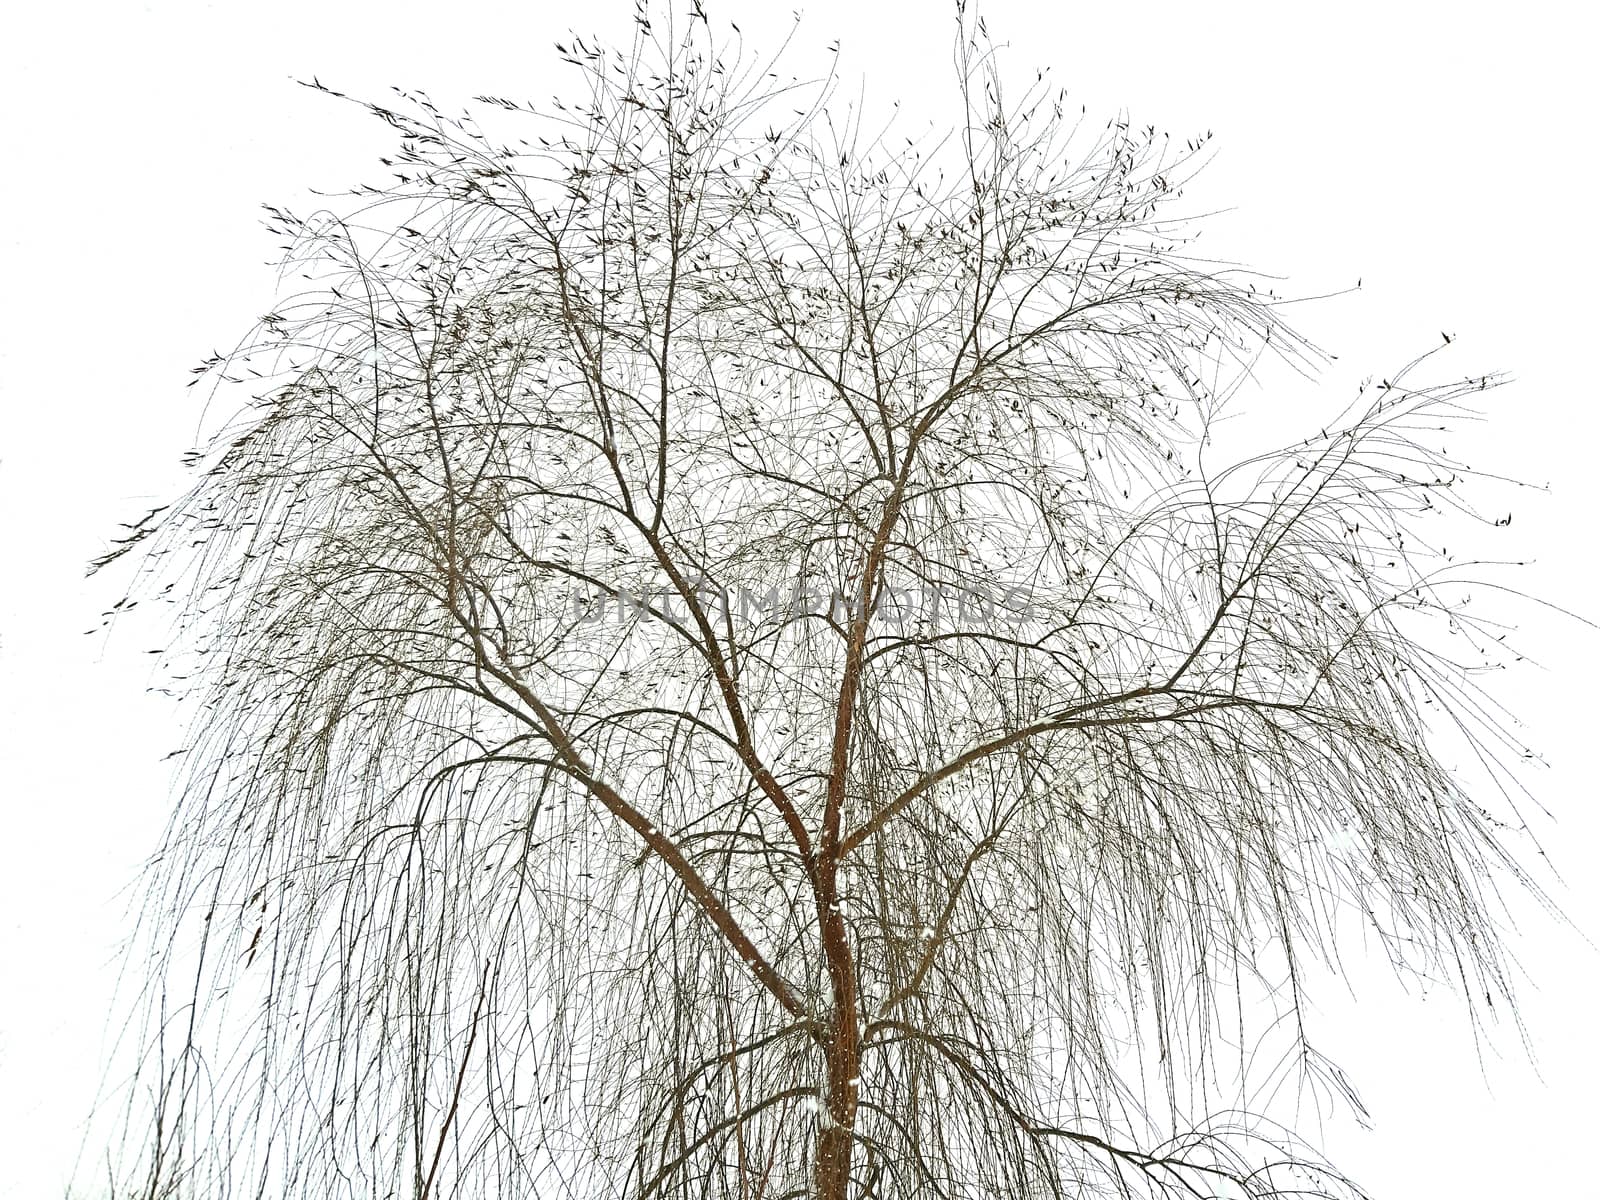 Willow tree on snowy white sky in winter by Mindru